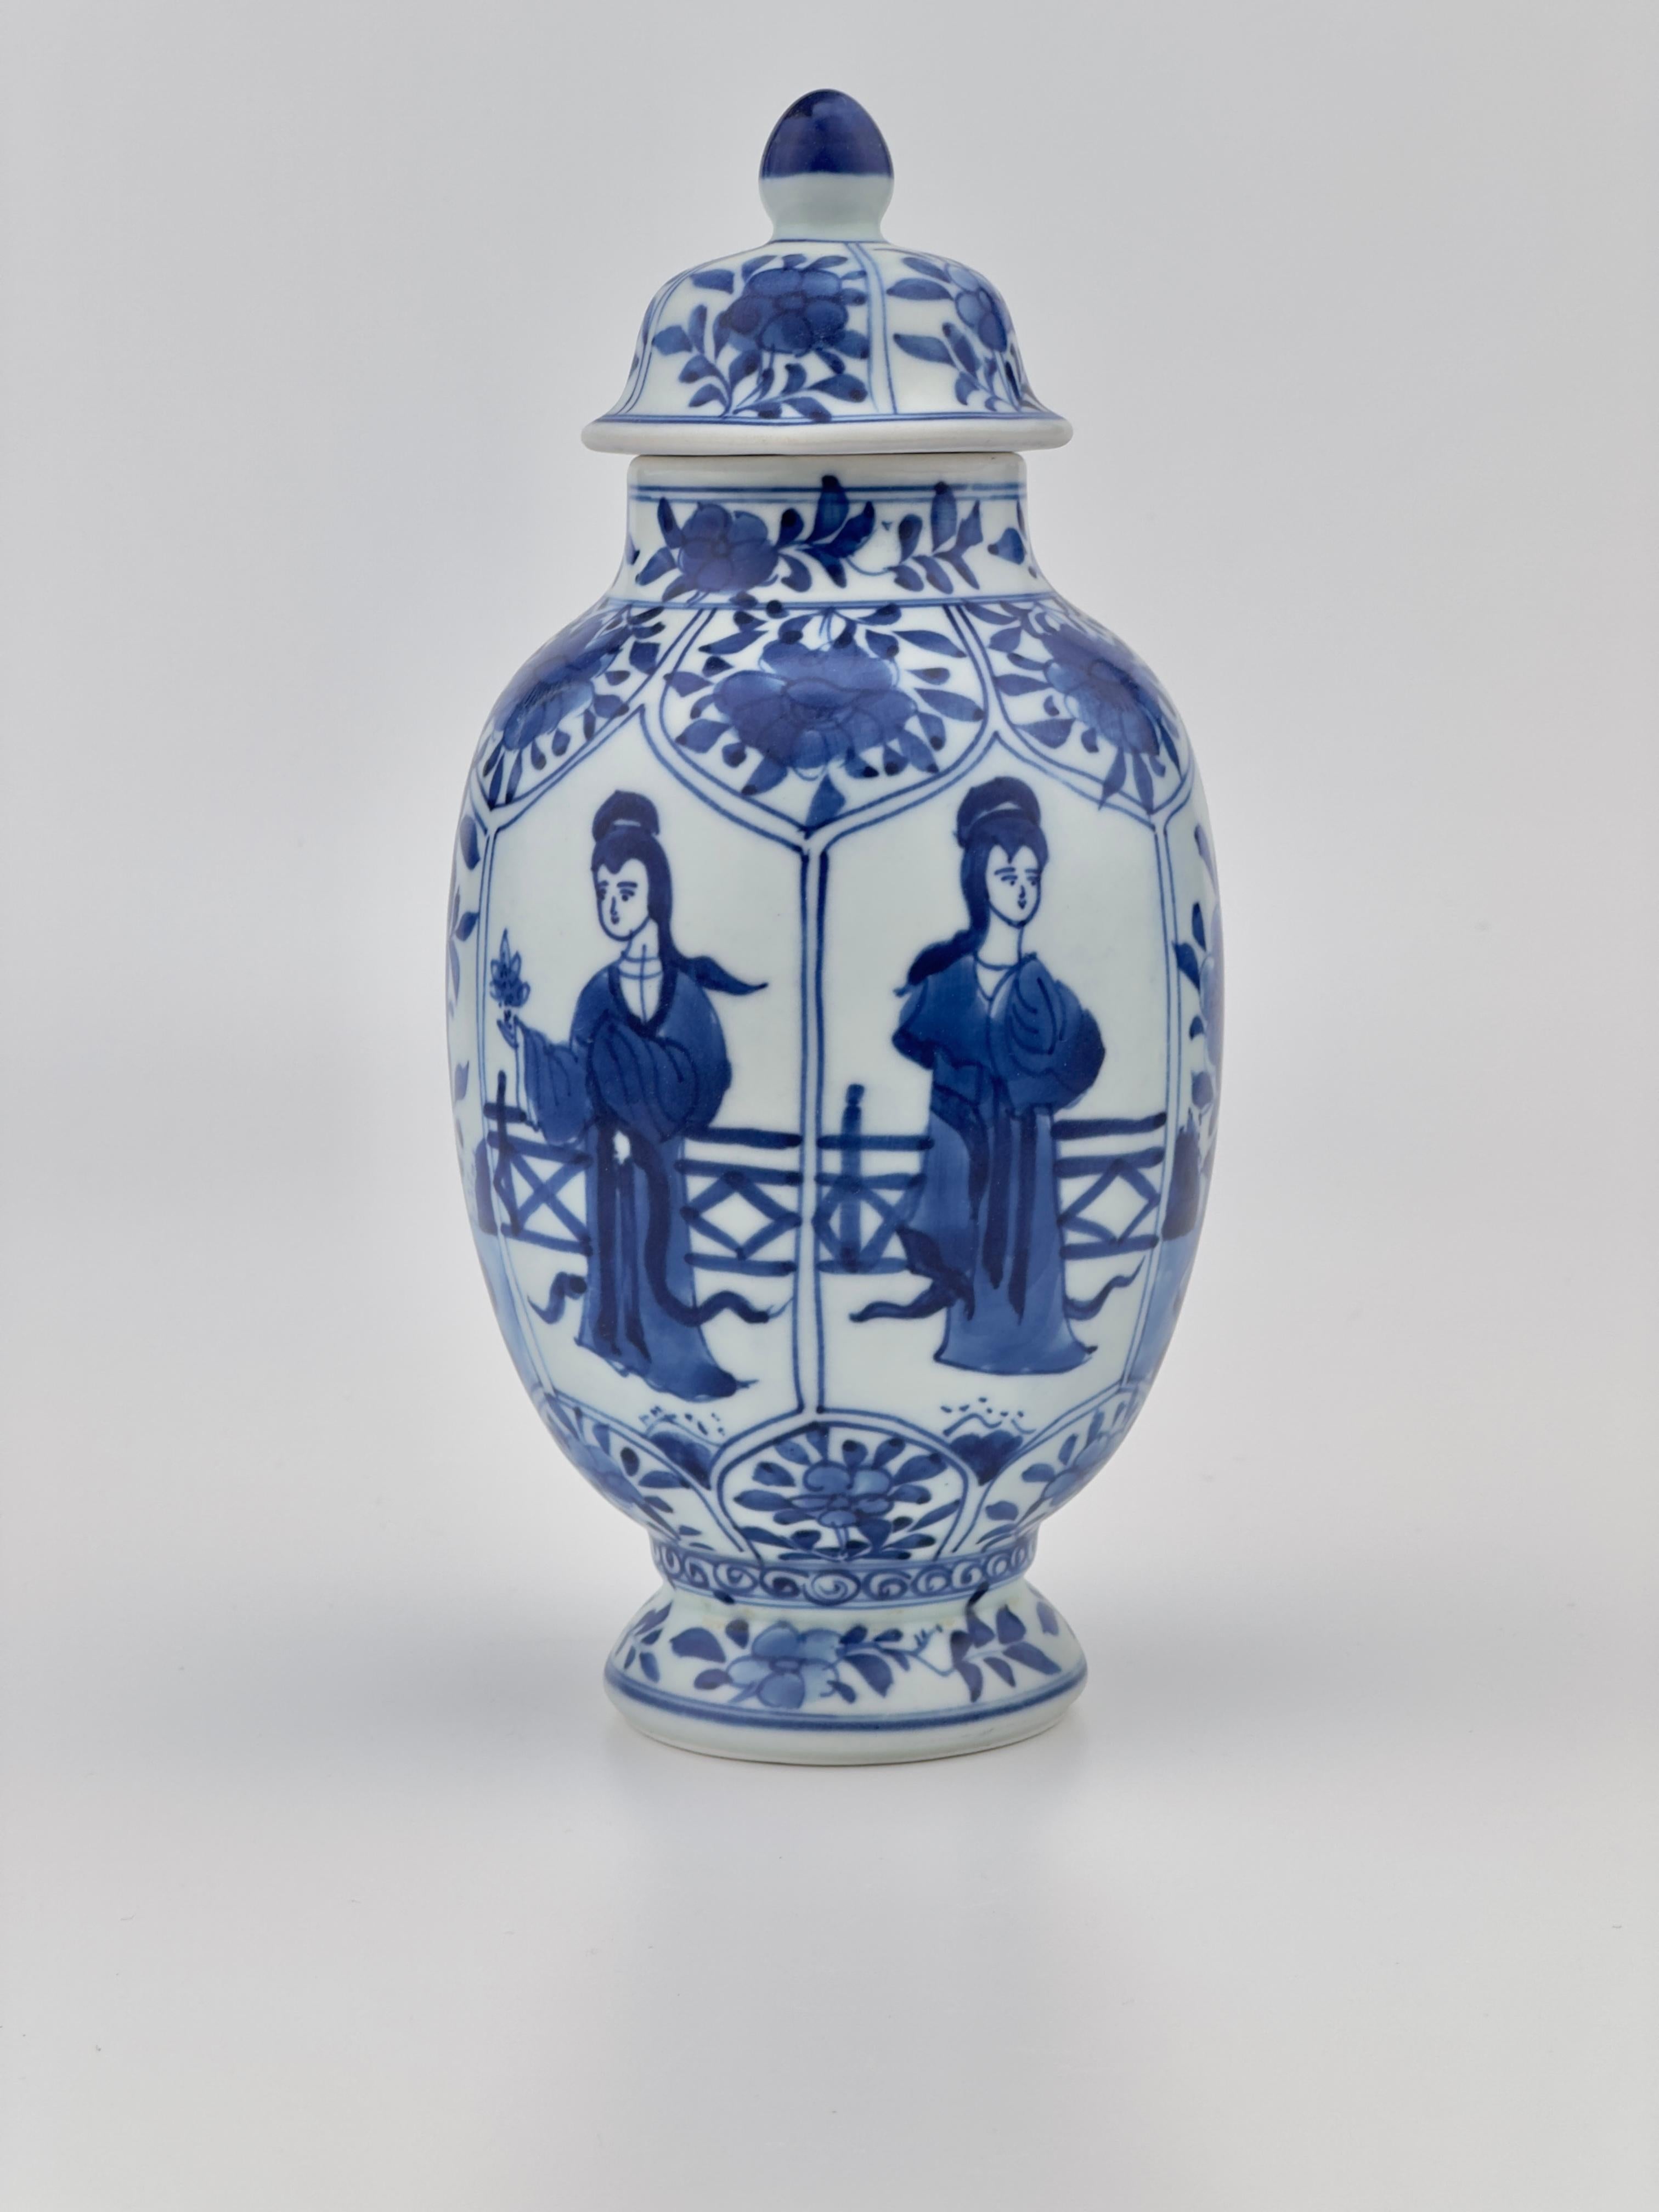 Vung Tau Shipwreck Coralized Blue Underglazed Porcelain Lidded Vase. Almost perfectly Identical piece from Vietnamese Royal Family in United States provenance have been sold at other auction in California. This stunning porcelain lidded vase is